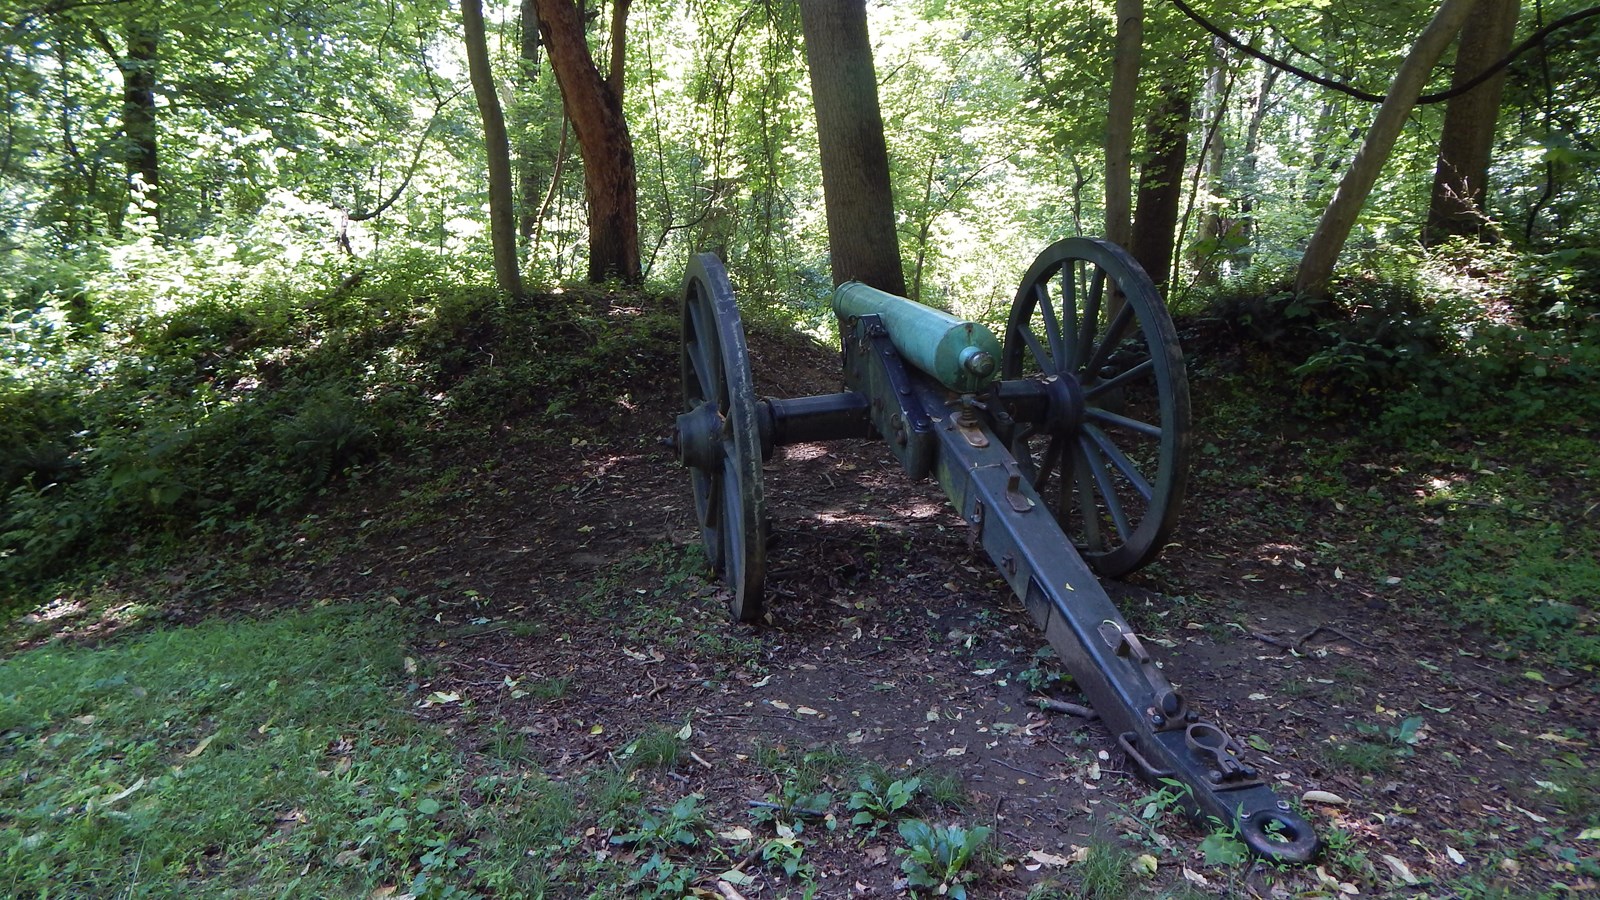 Cannon at Fort Marcy Park. Trees and bushes in the background.